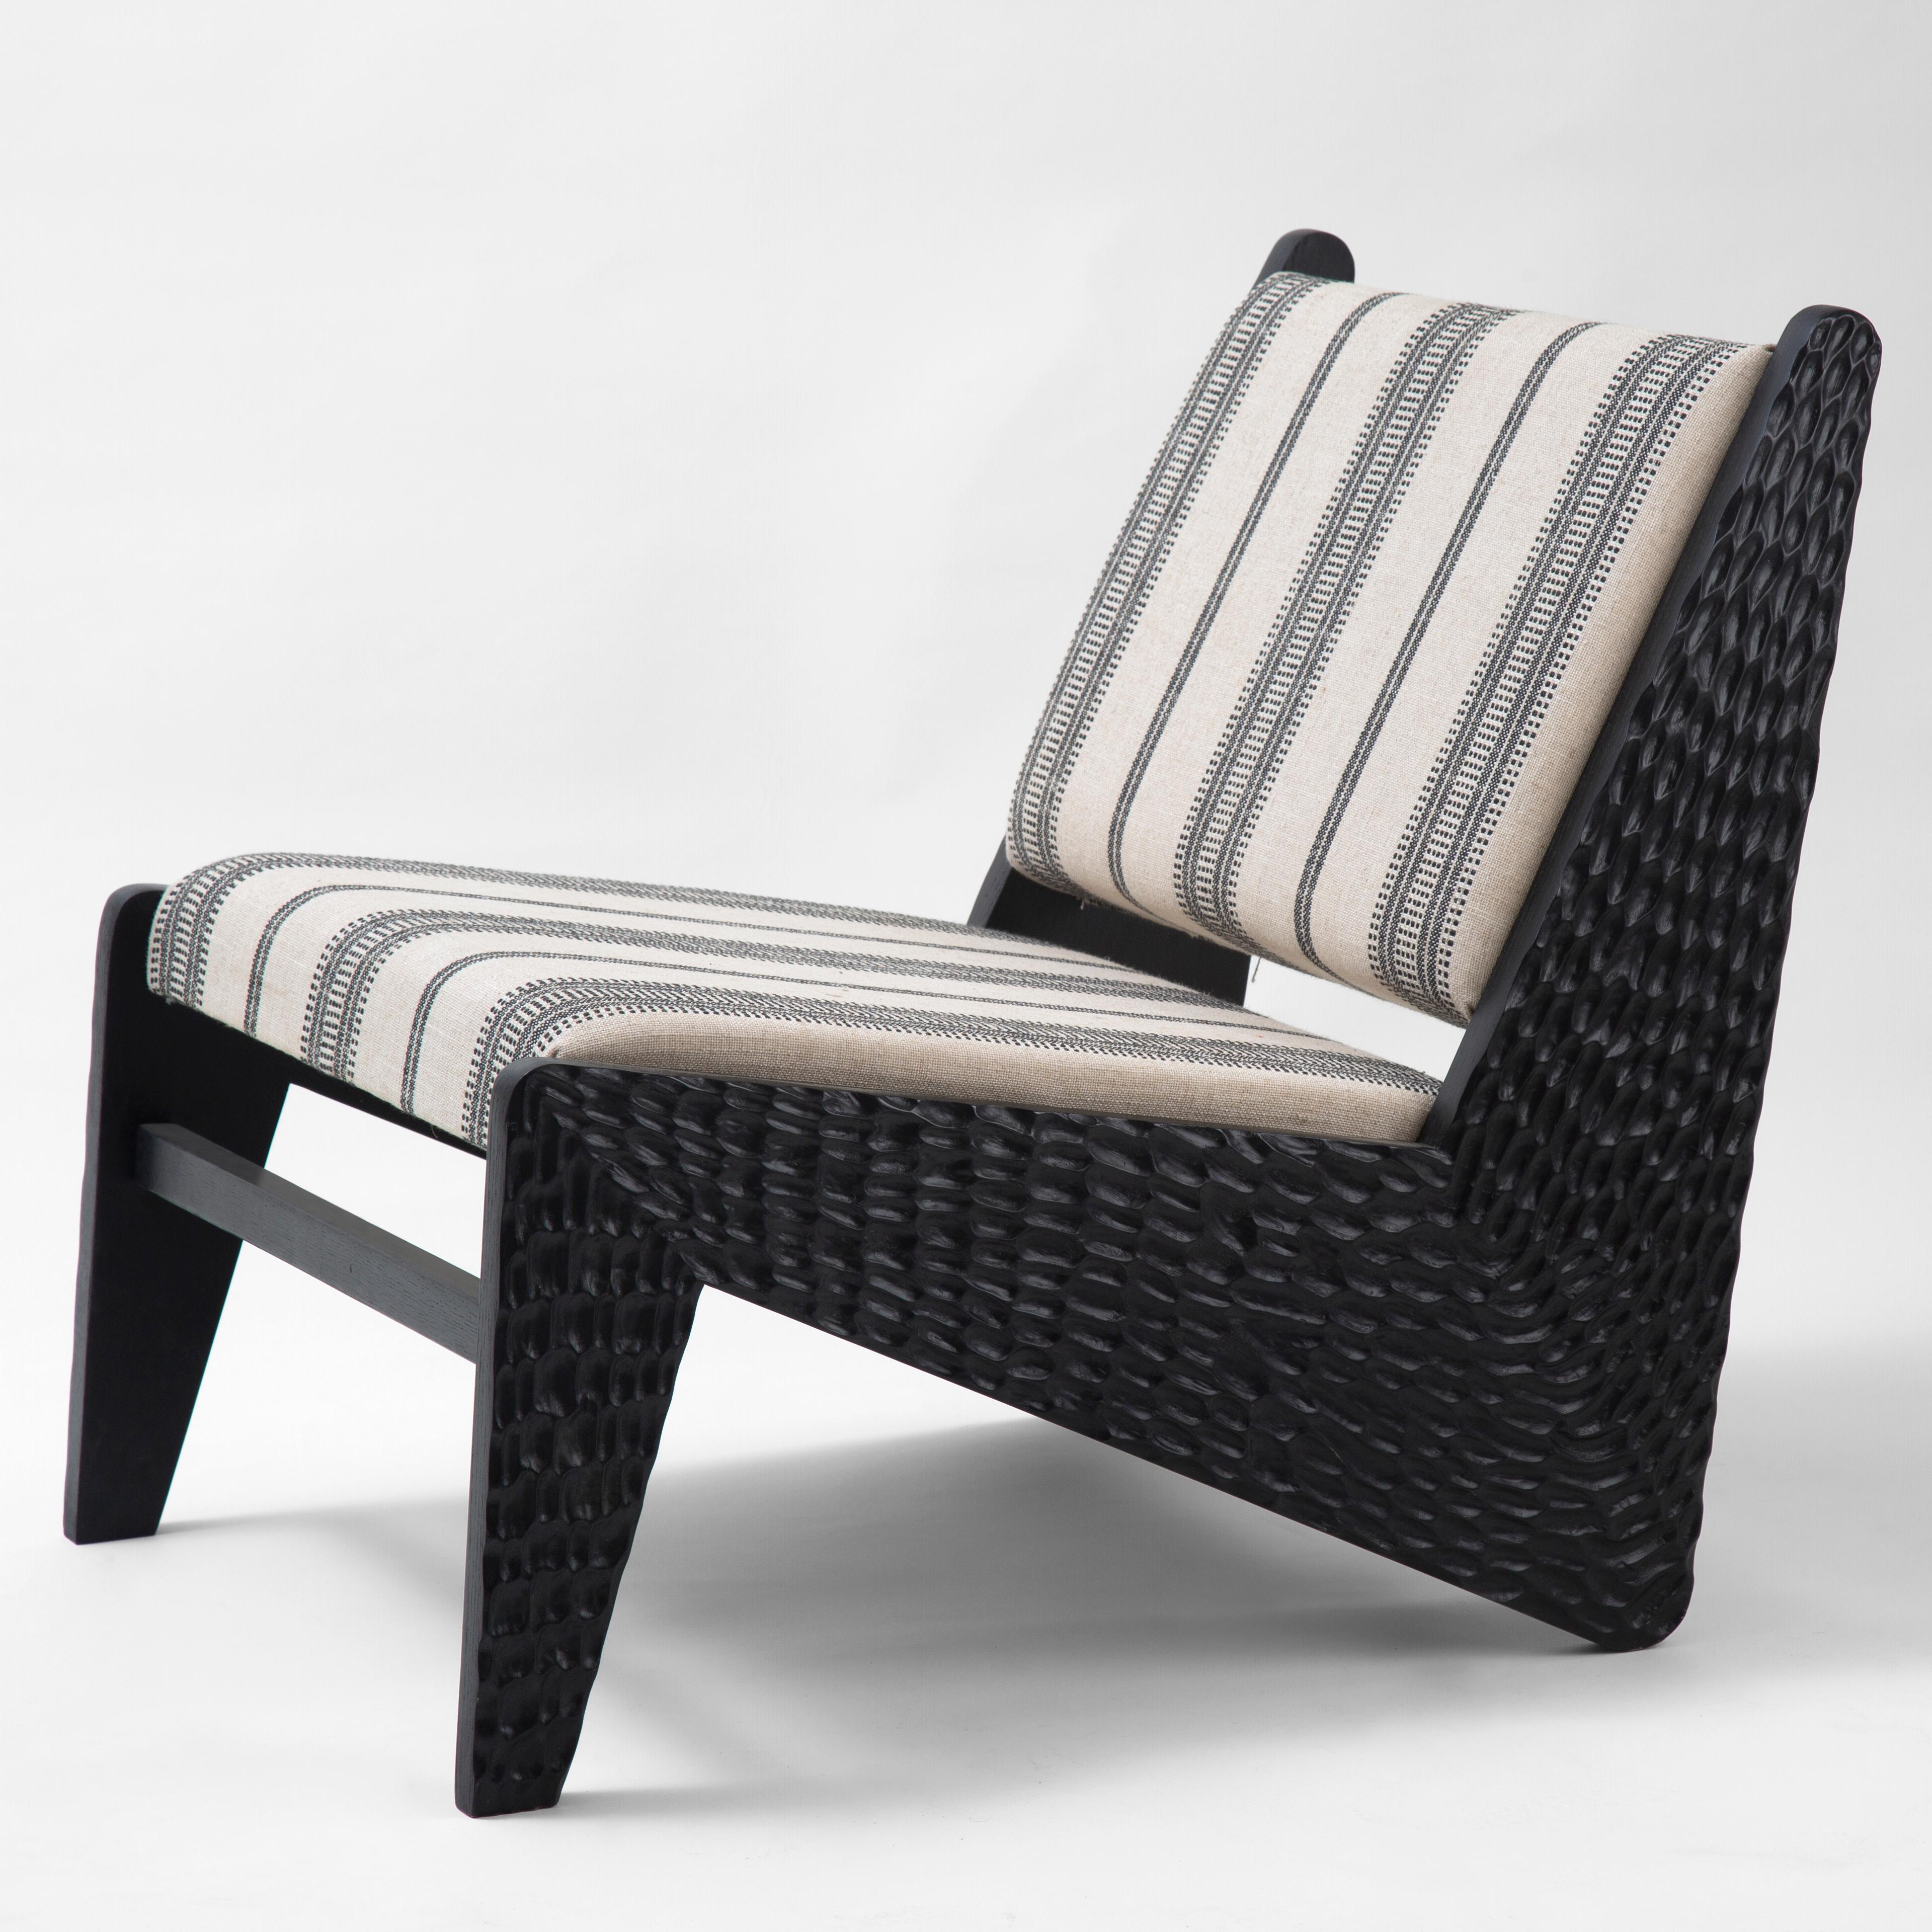 Hand-Carved Hand Carved Oak Lounge Chair Inspired by Nomadic Furniture of the Oases in Egypt